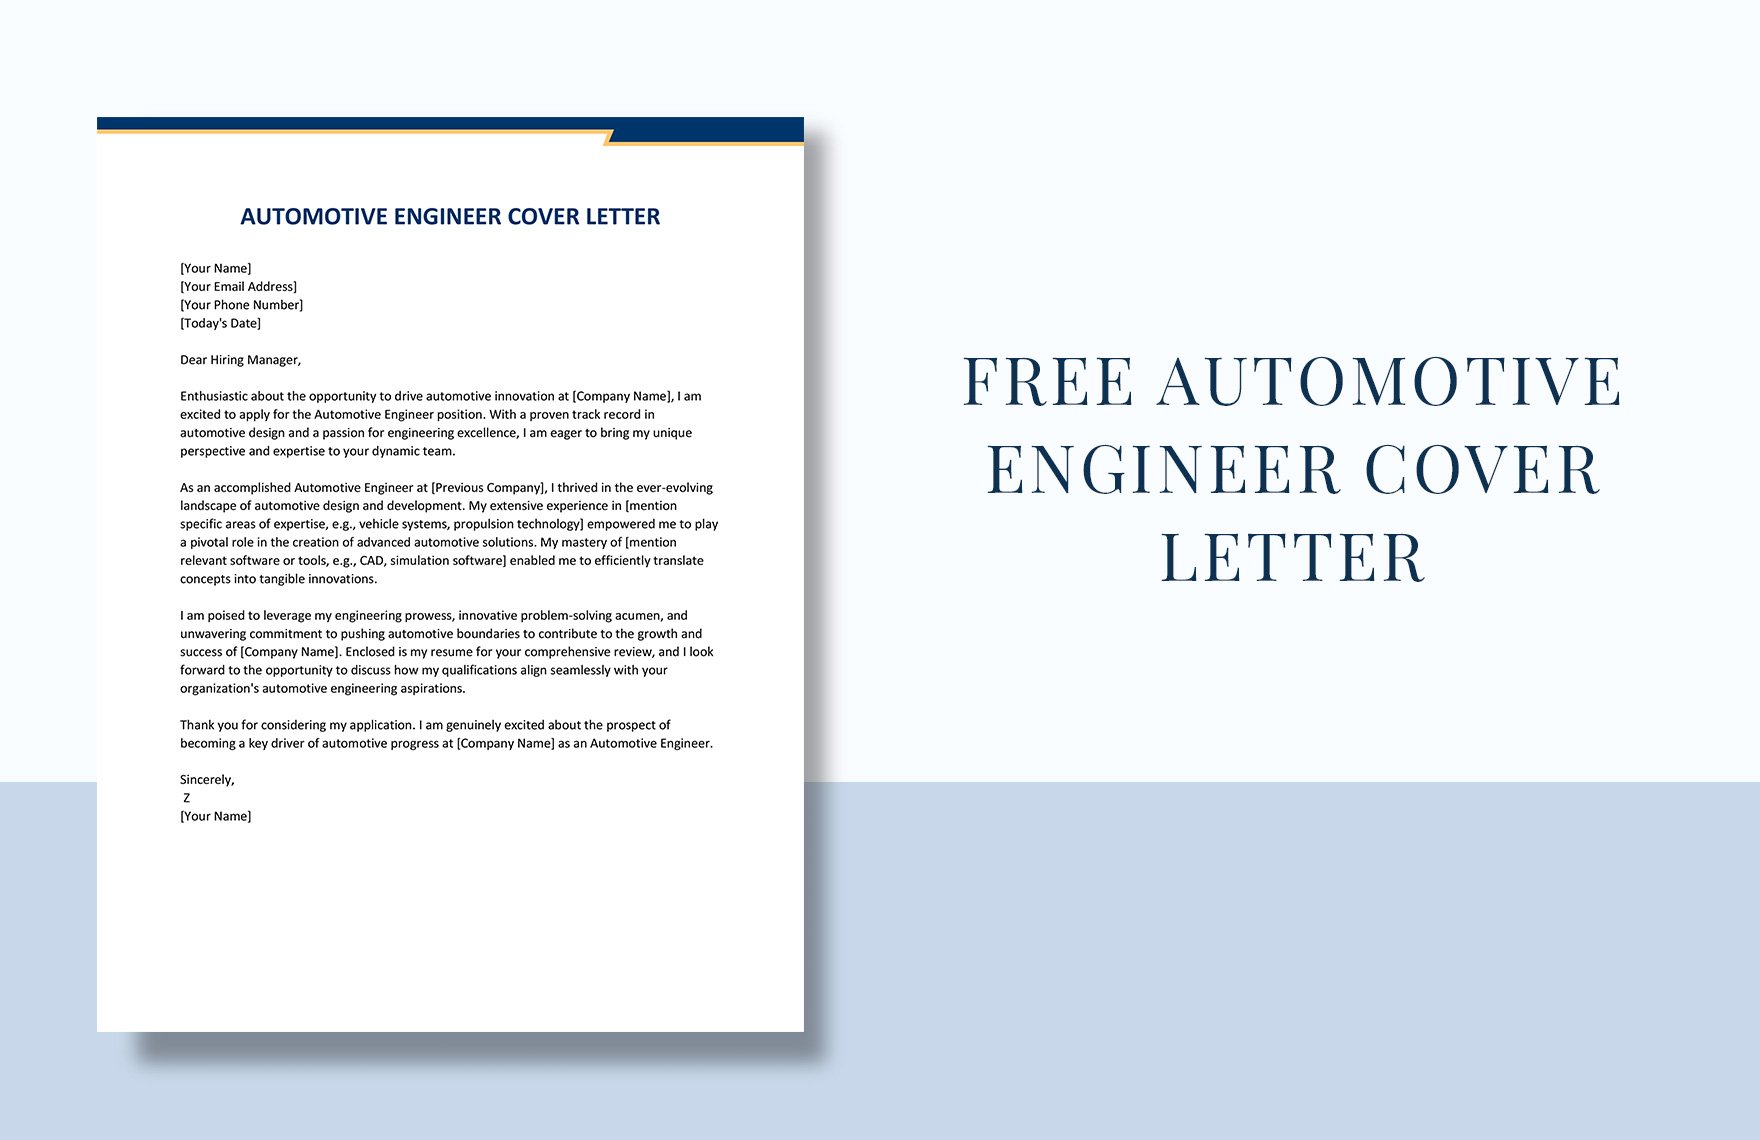 Automotive Engineer Cover Letter